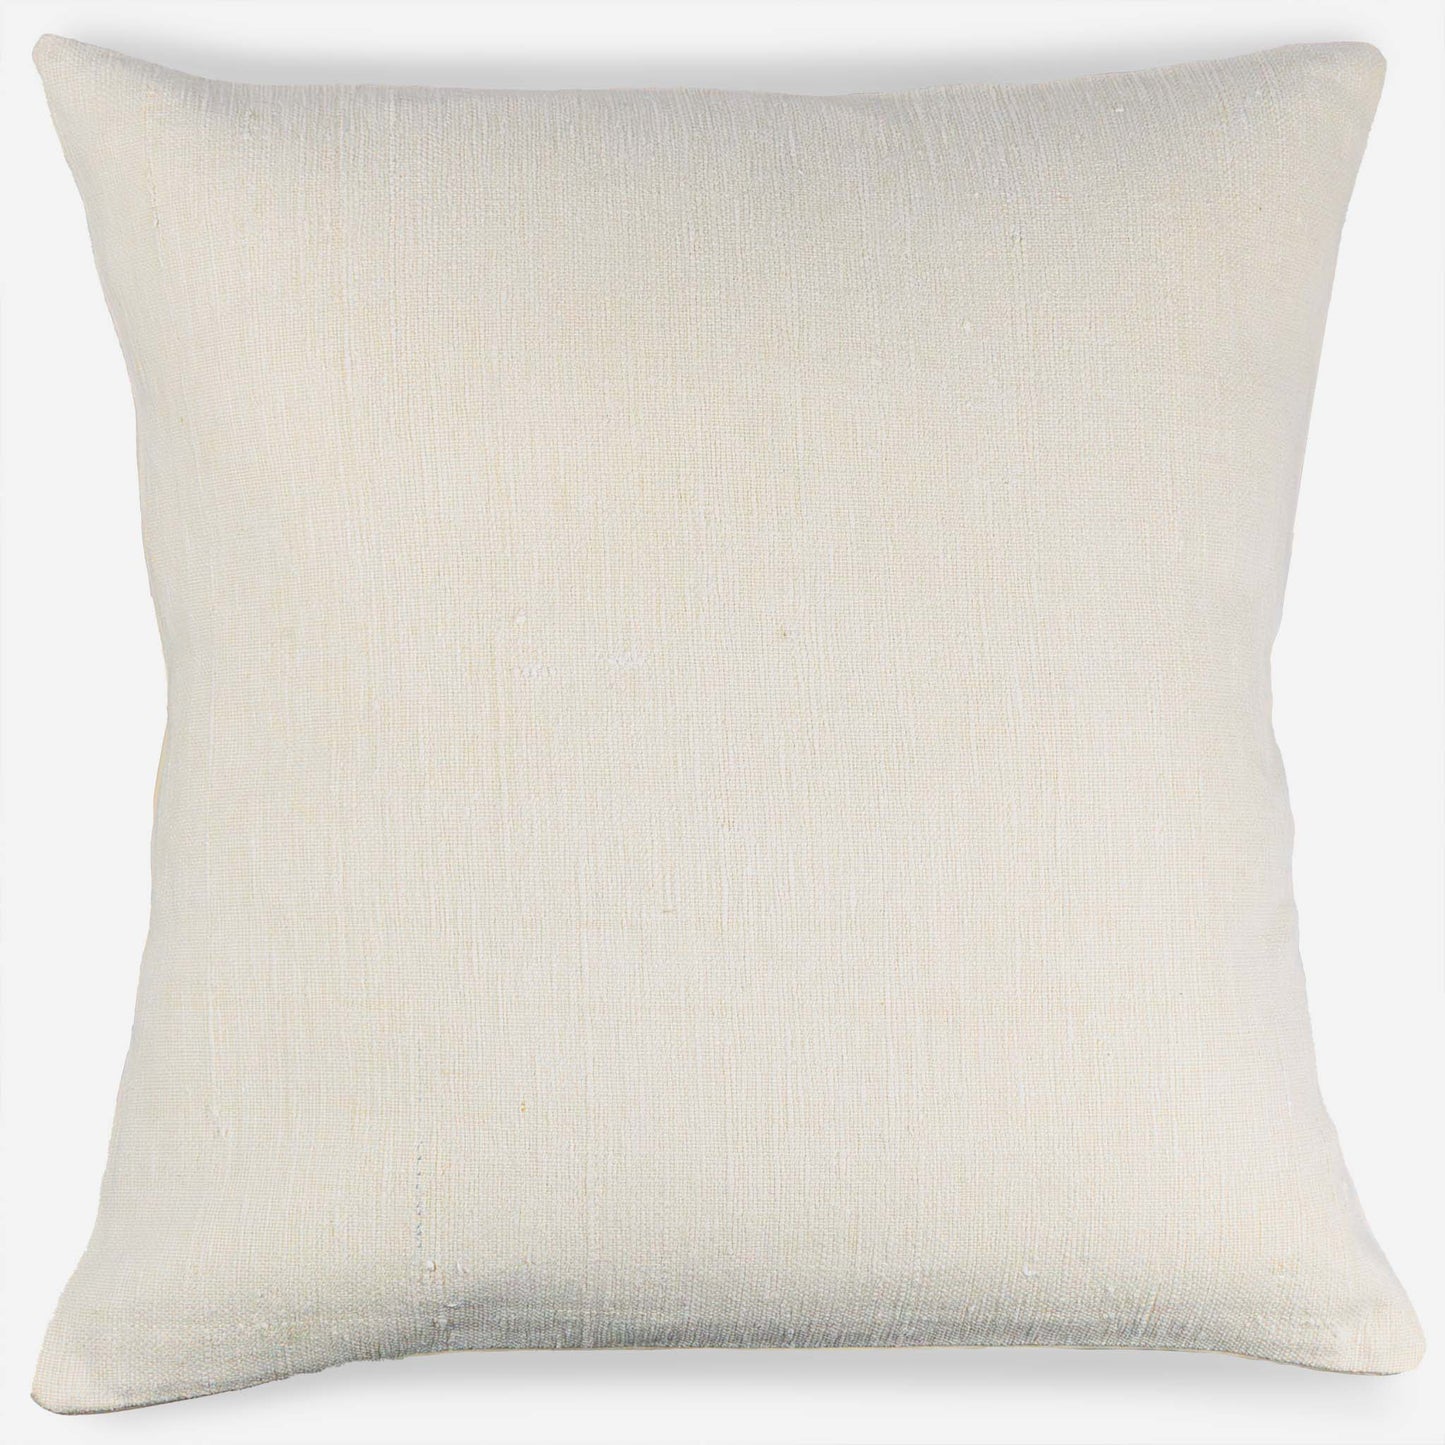 Handwoven Turkish kilim pillow cover in ivory white on light gray background.